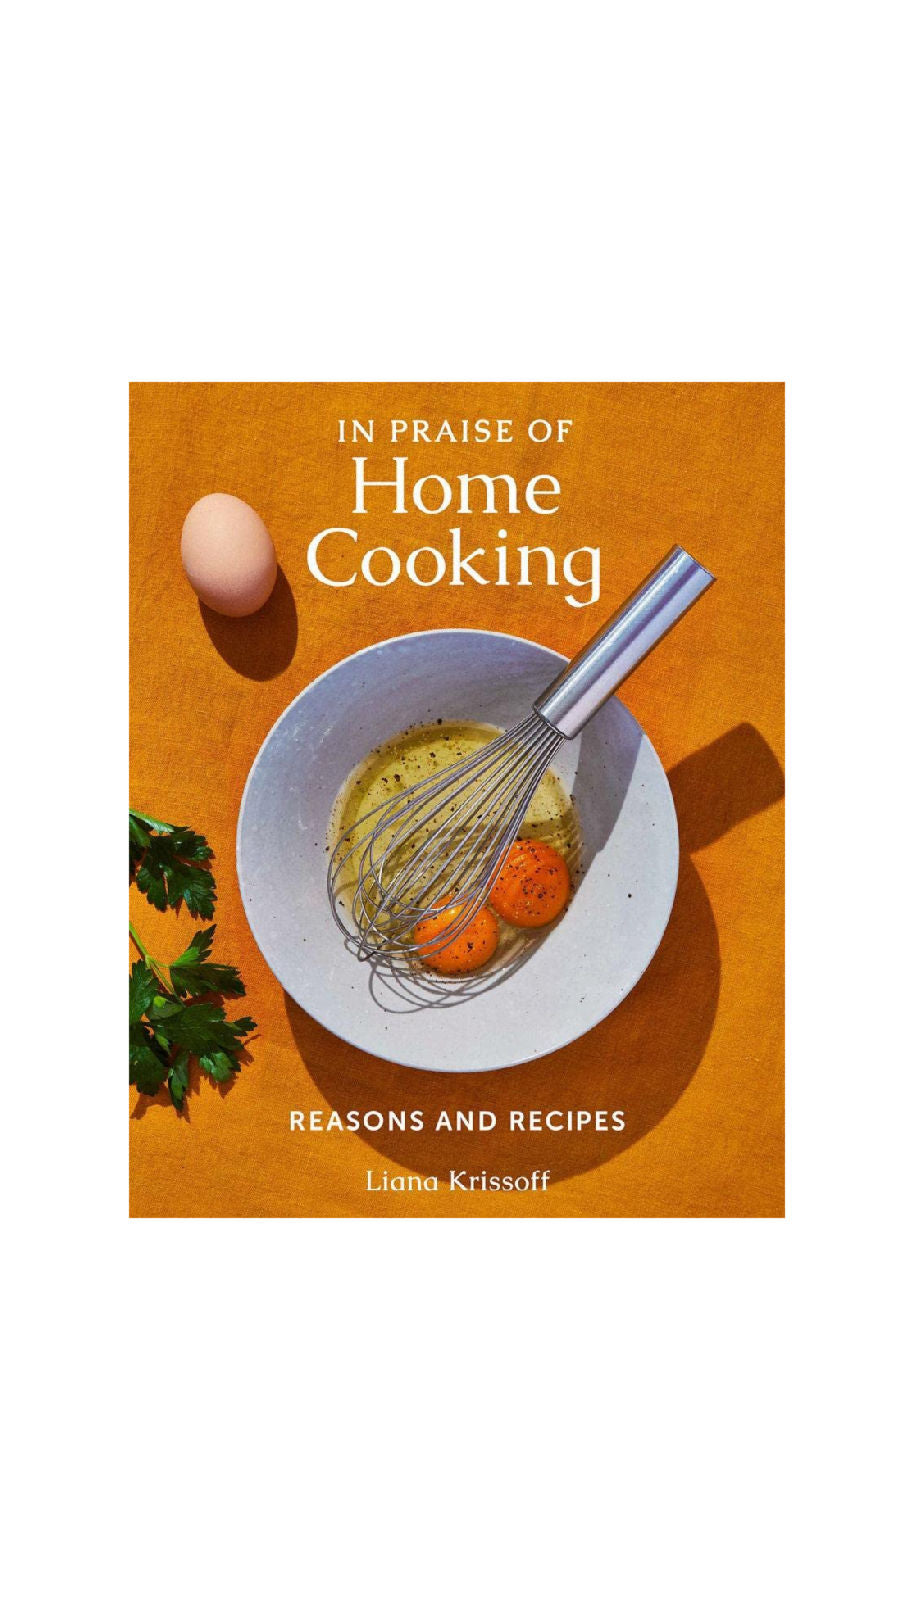 In Praise of Home Cooking/ LIANA KRISSOFF